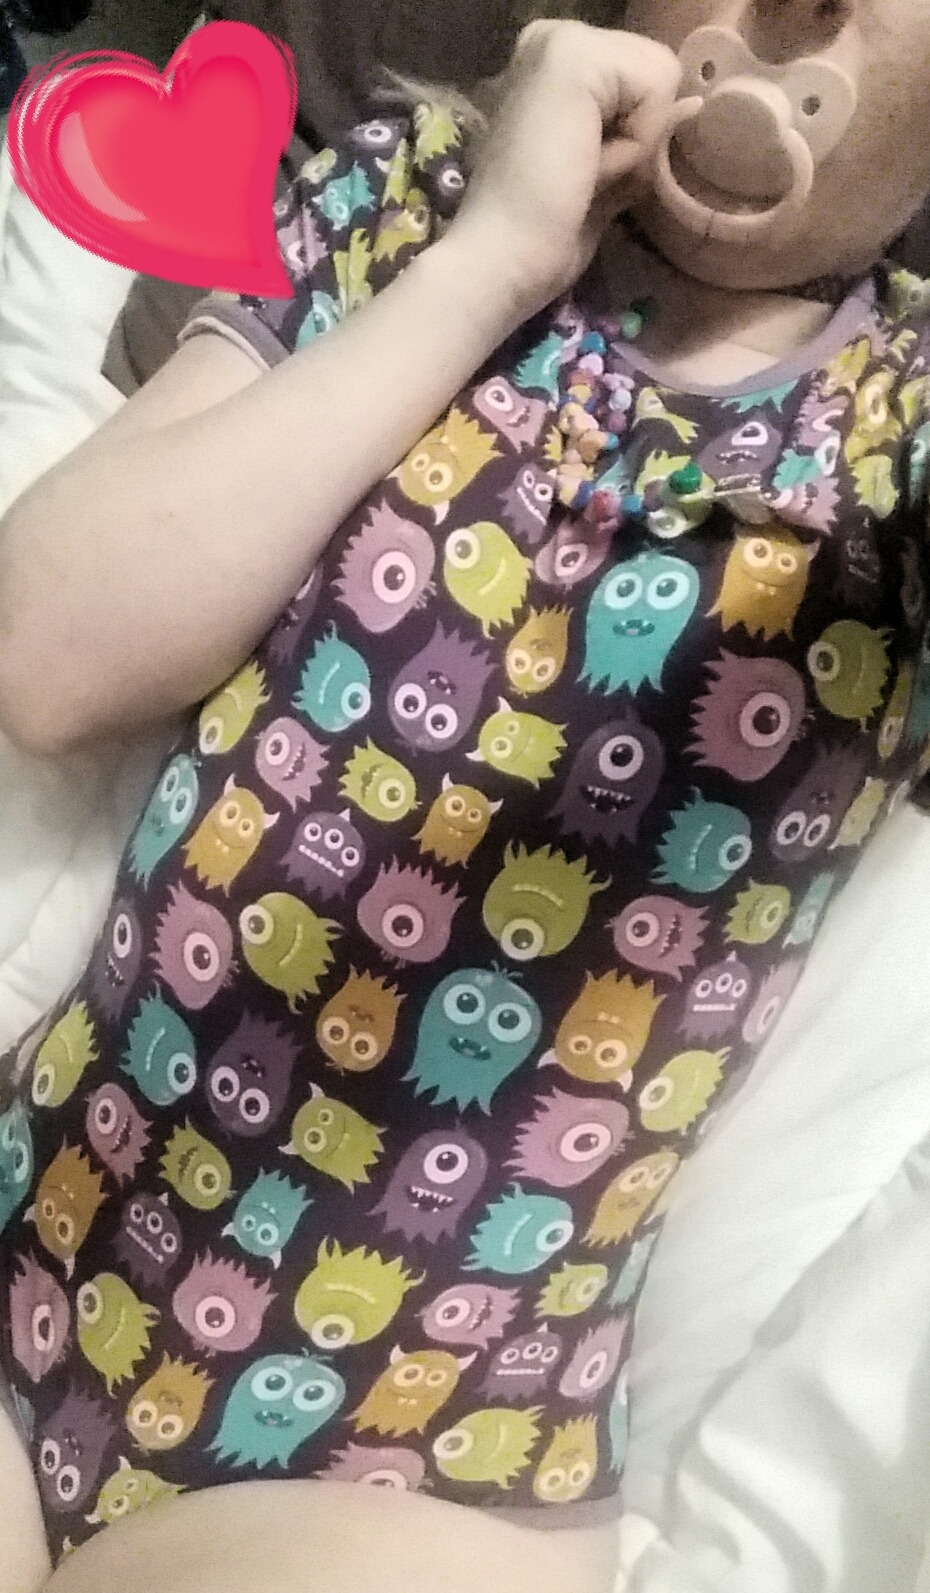 Got my first ever onesie and adult paci! This onesie is so comfy, I could stay in